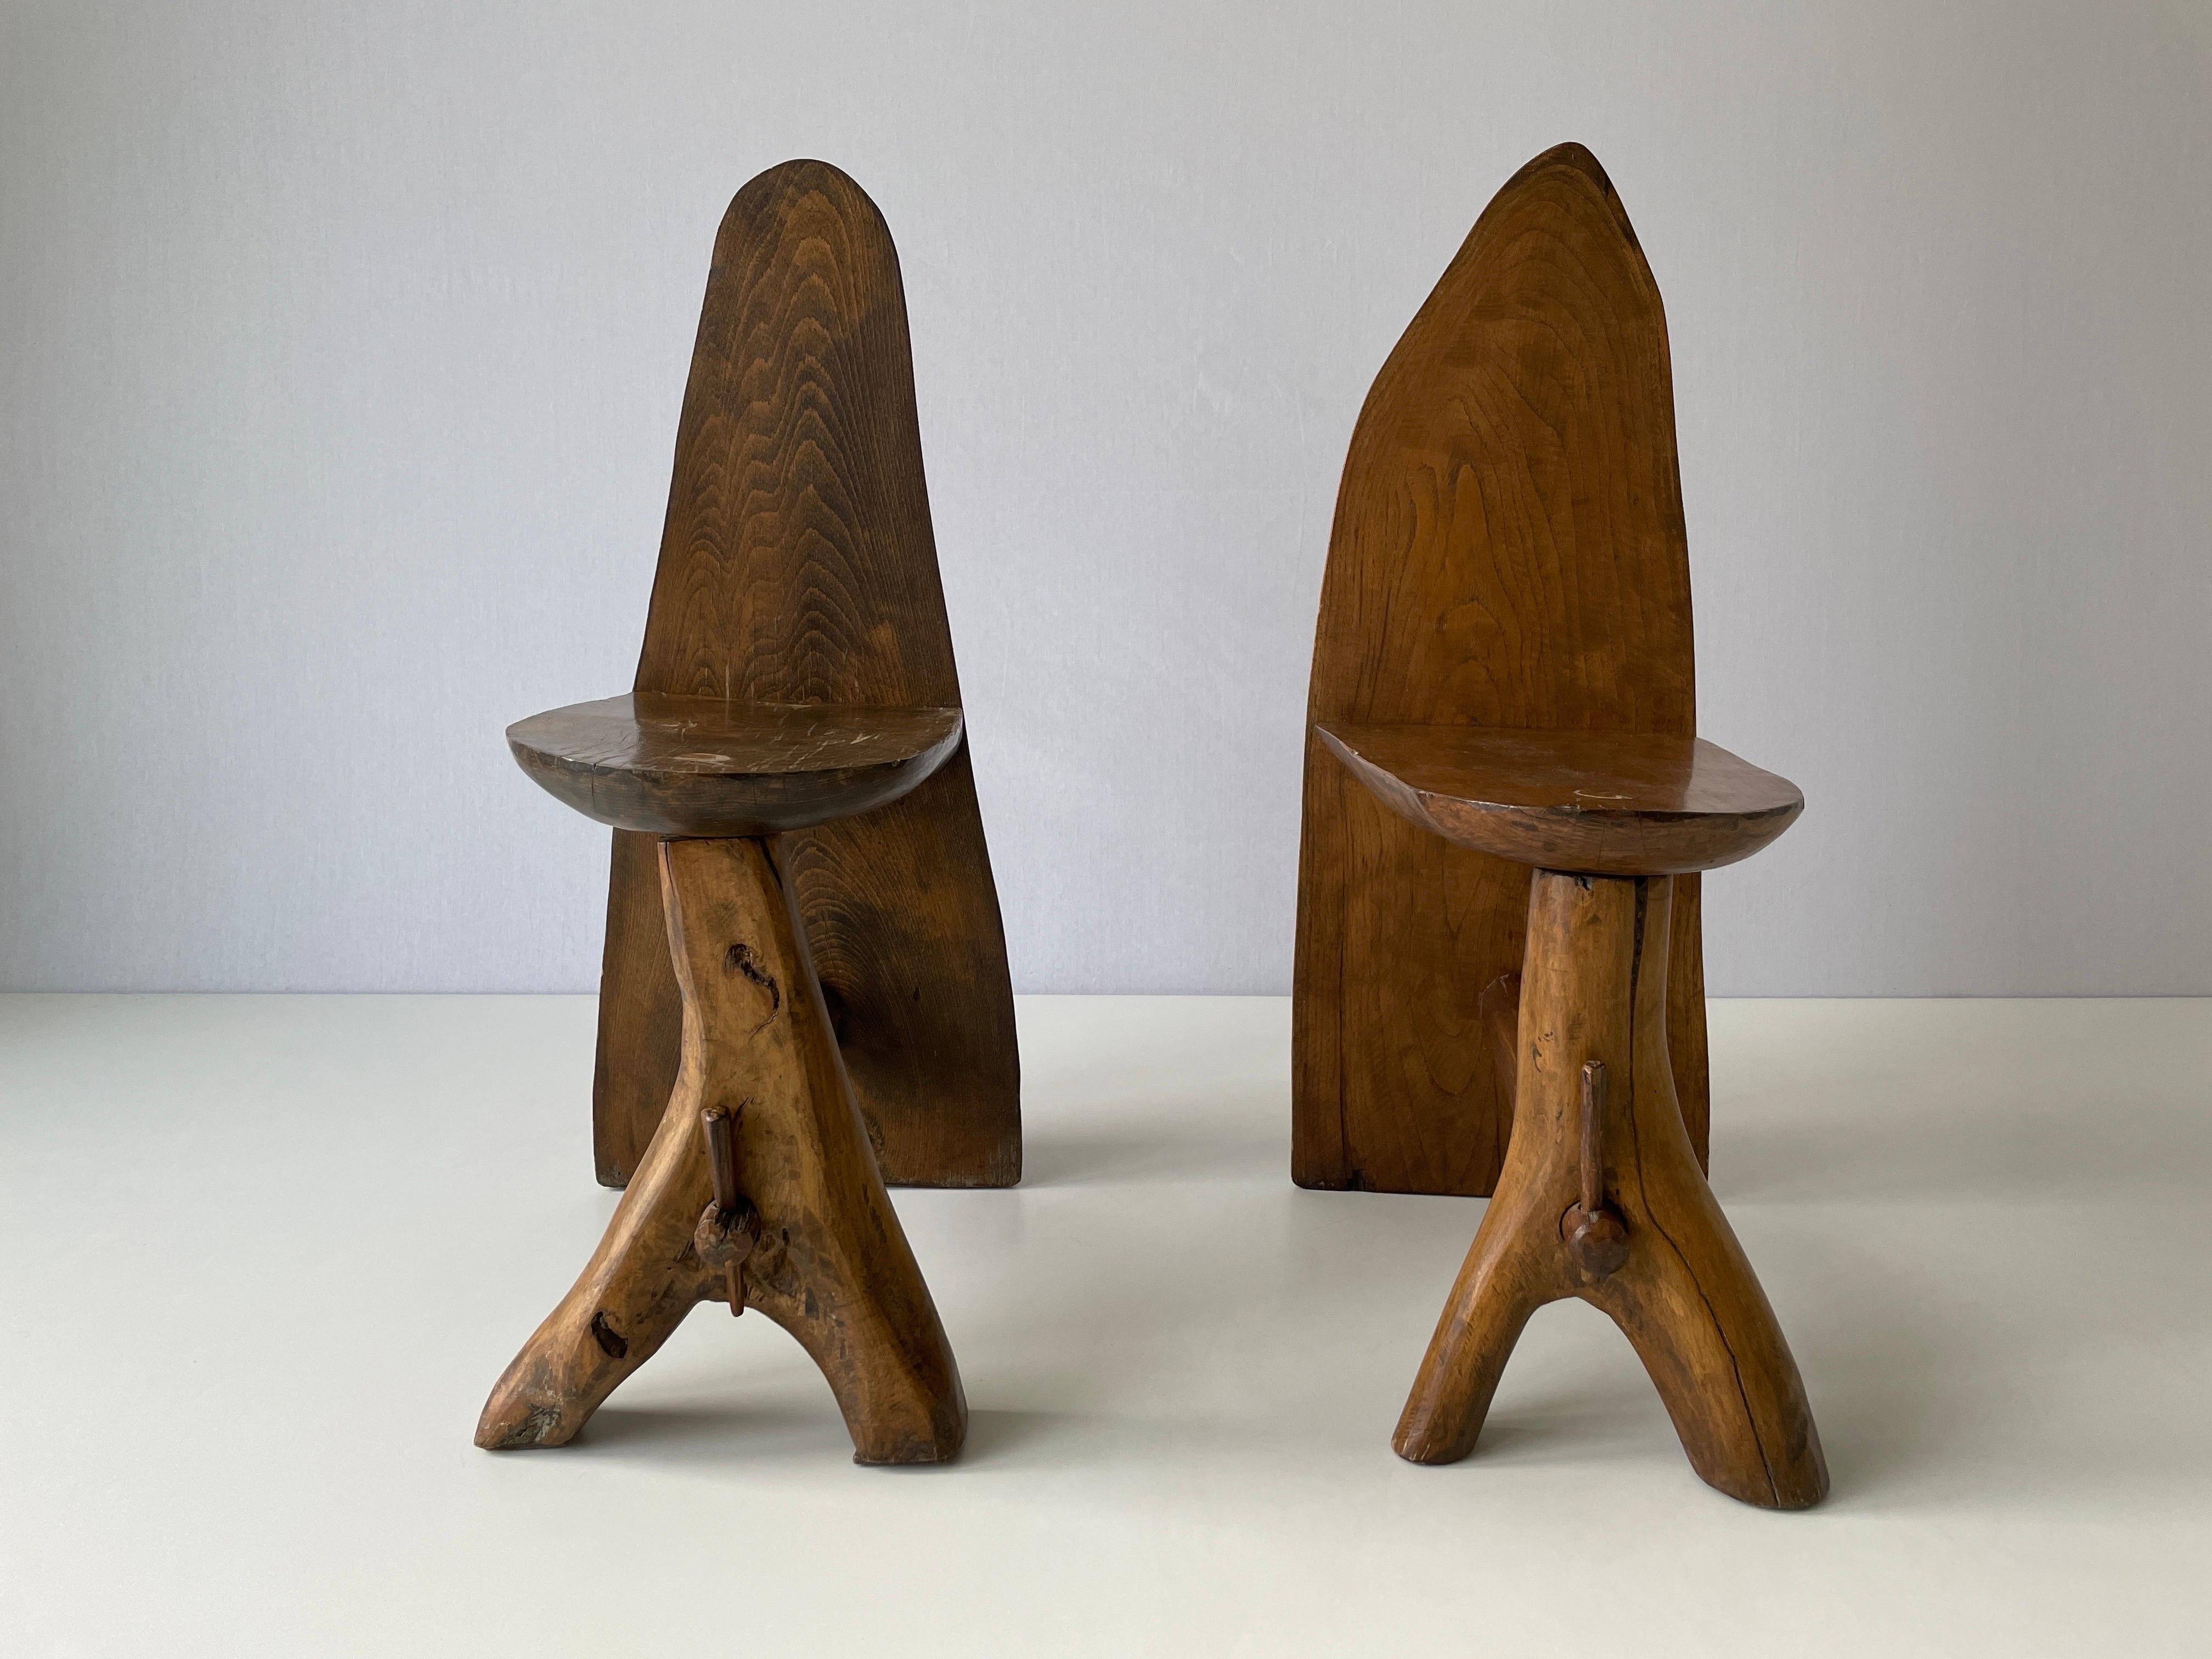 Hand-crafted Primitive Design Solid Wood Pair of Chairs, 1950s, Italy For Sale 11